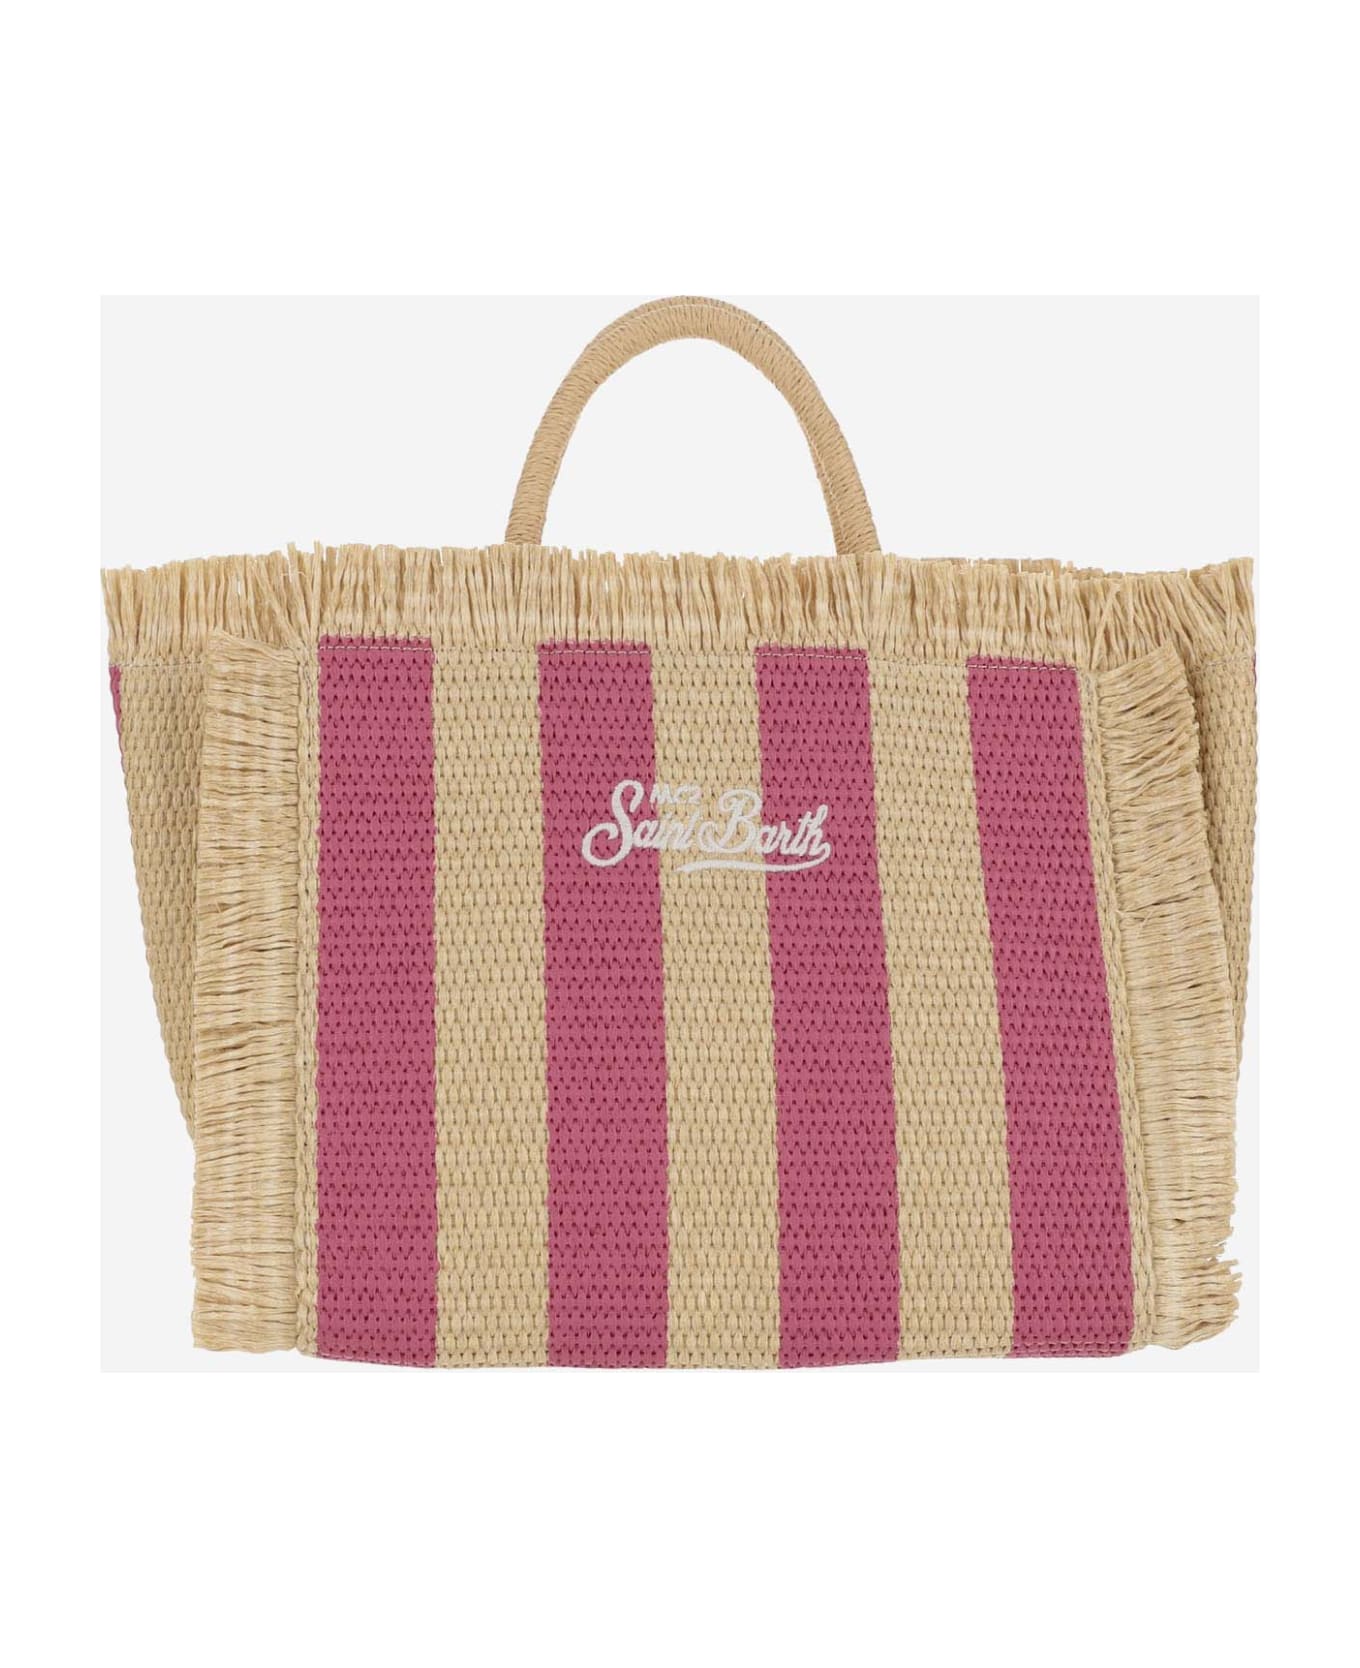 MC2 Saint Barth Colette Tote Bag With Striped Pattern - Red